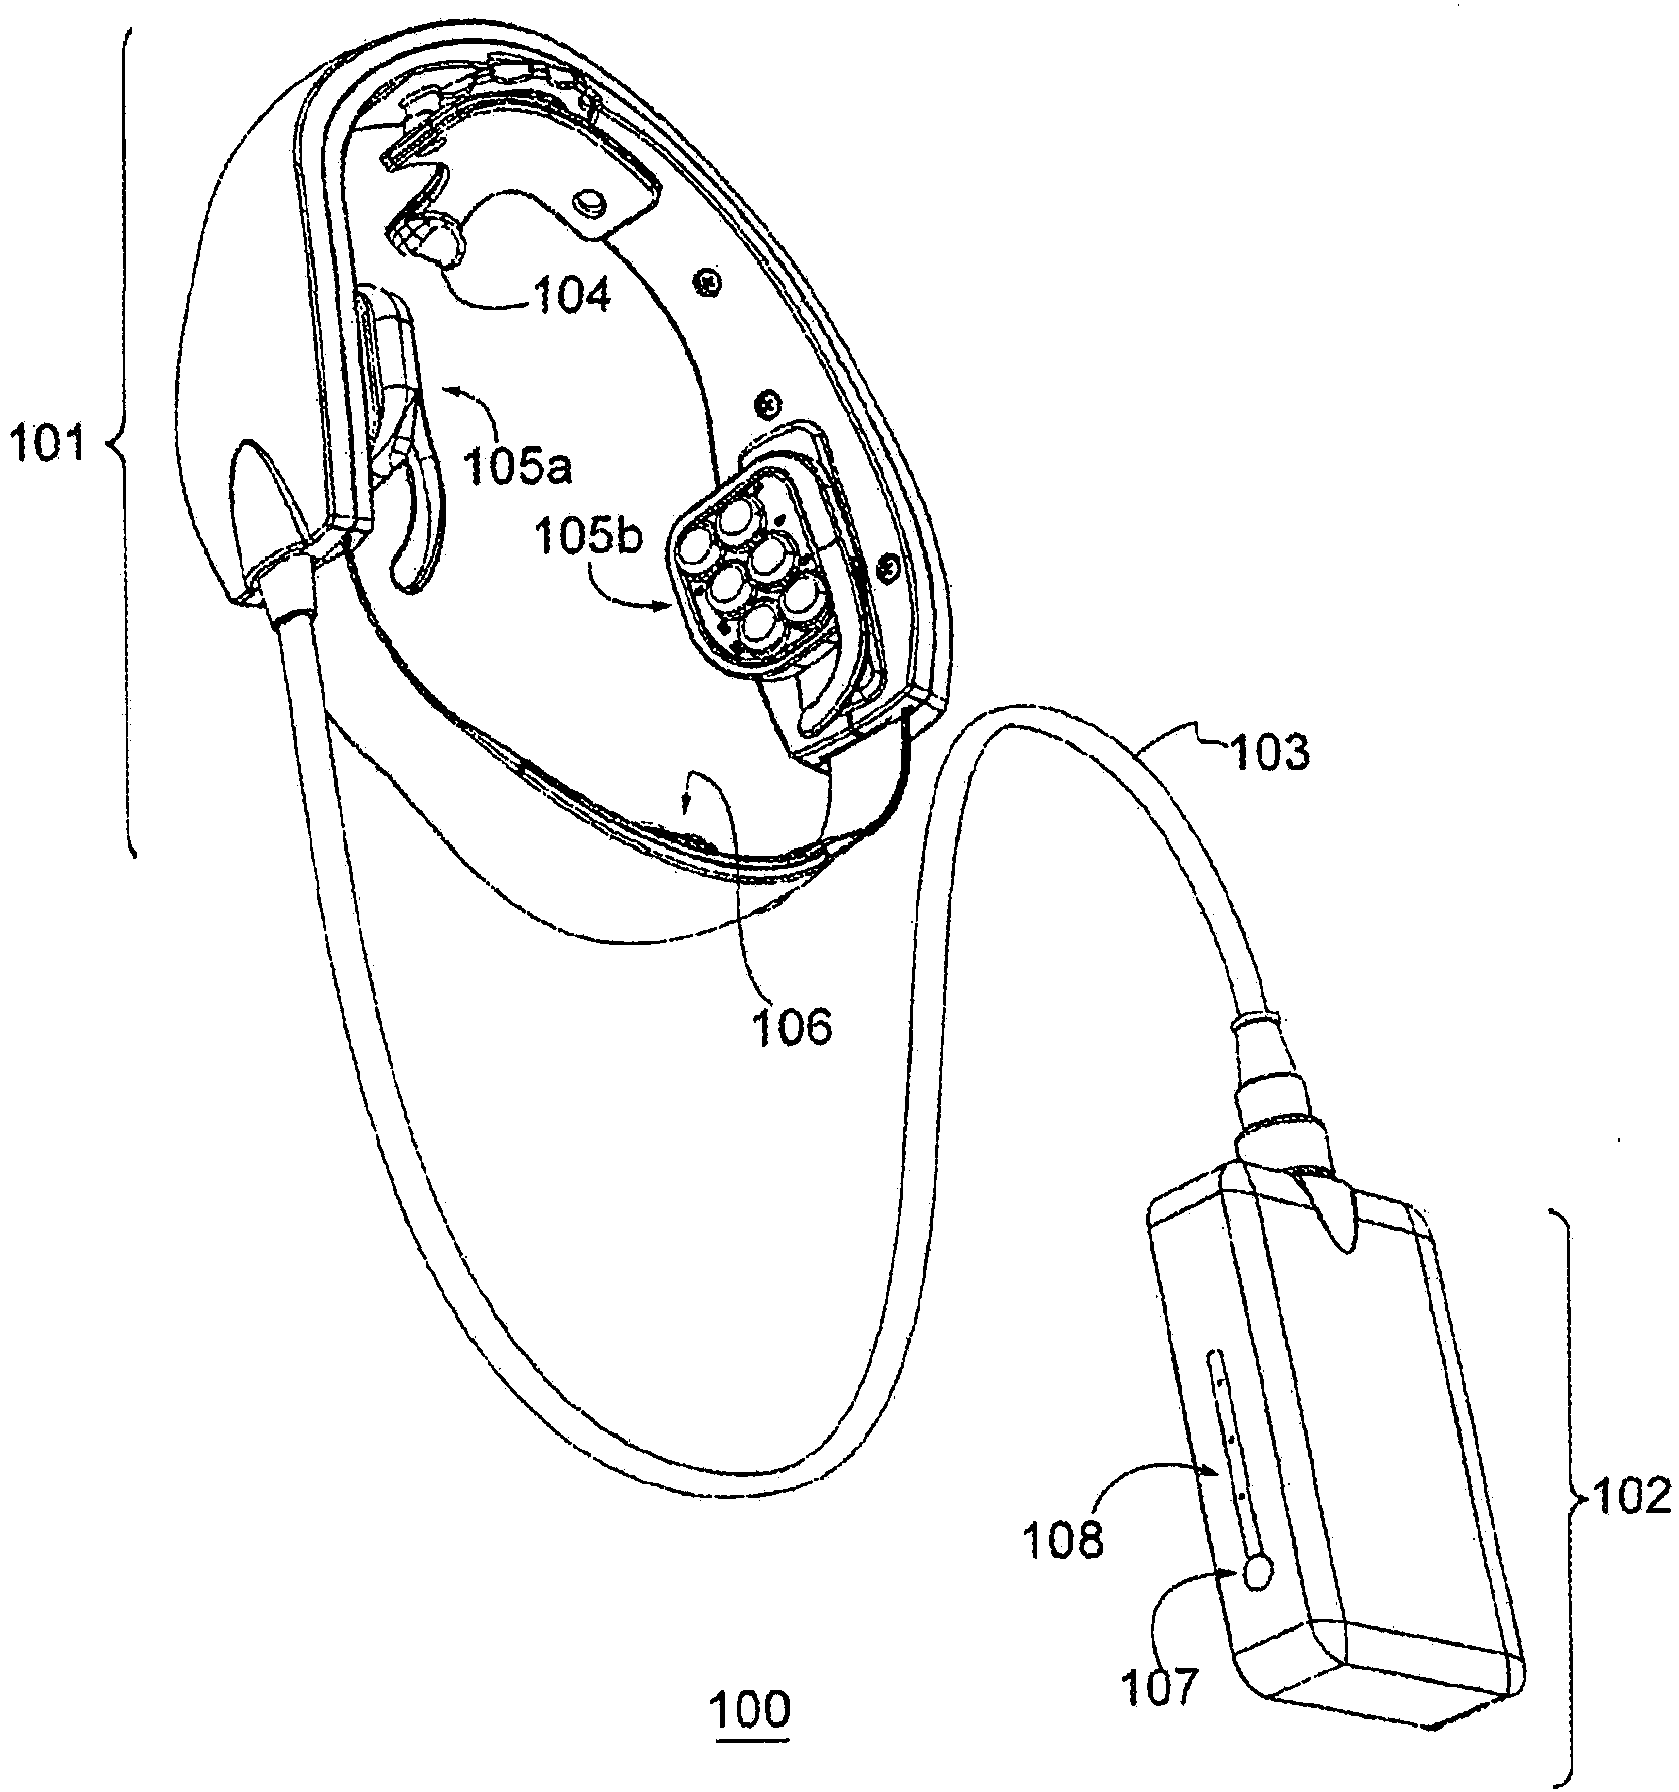 System and method for non-invasive transcranial insonation